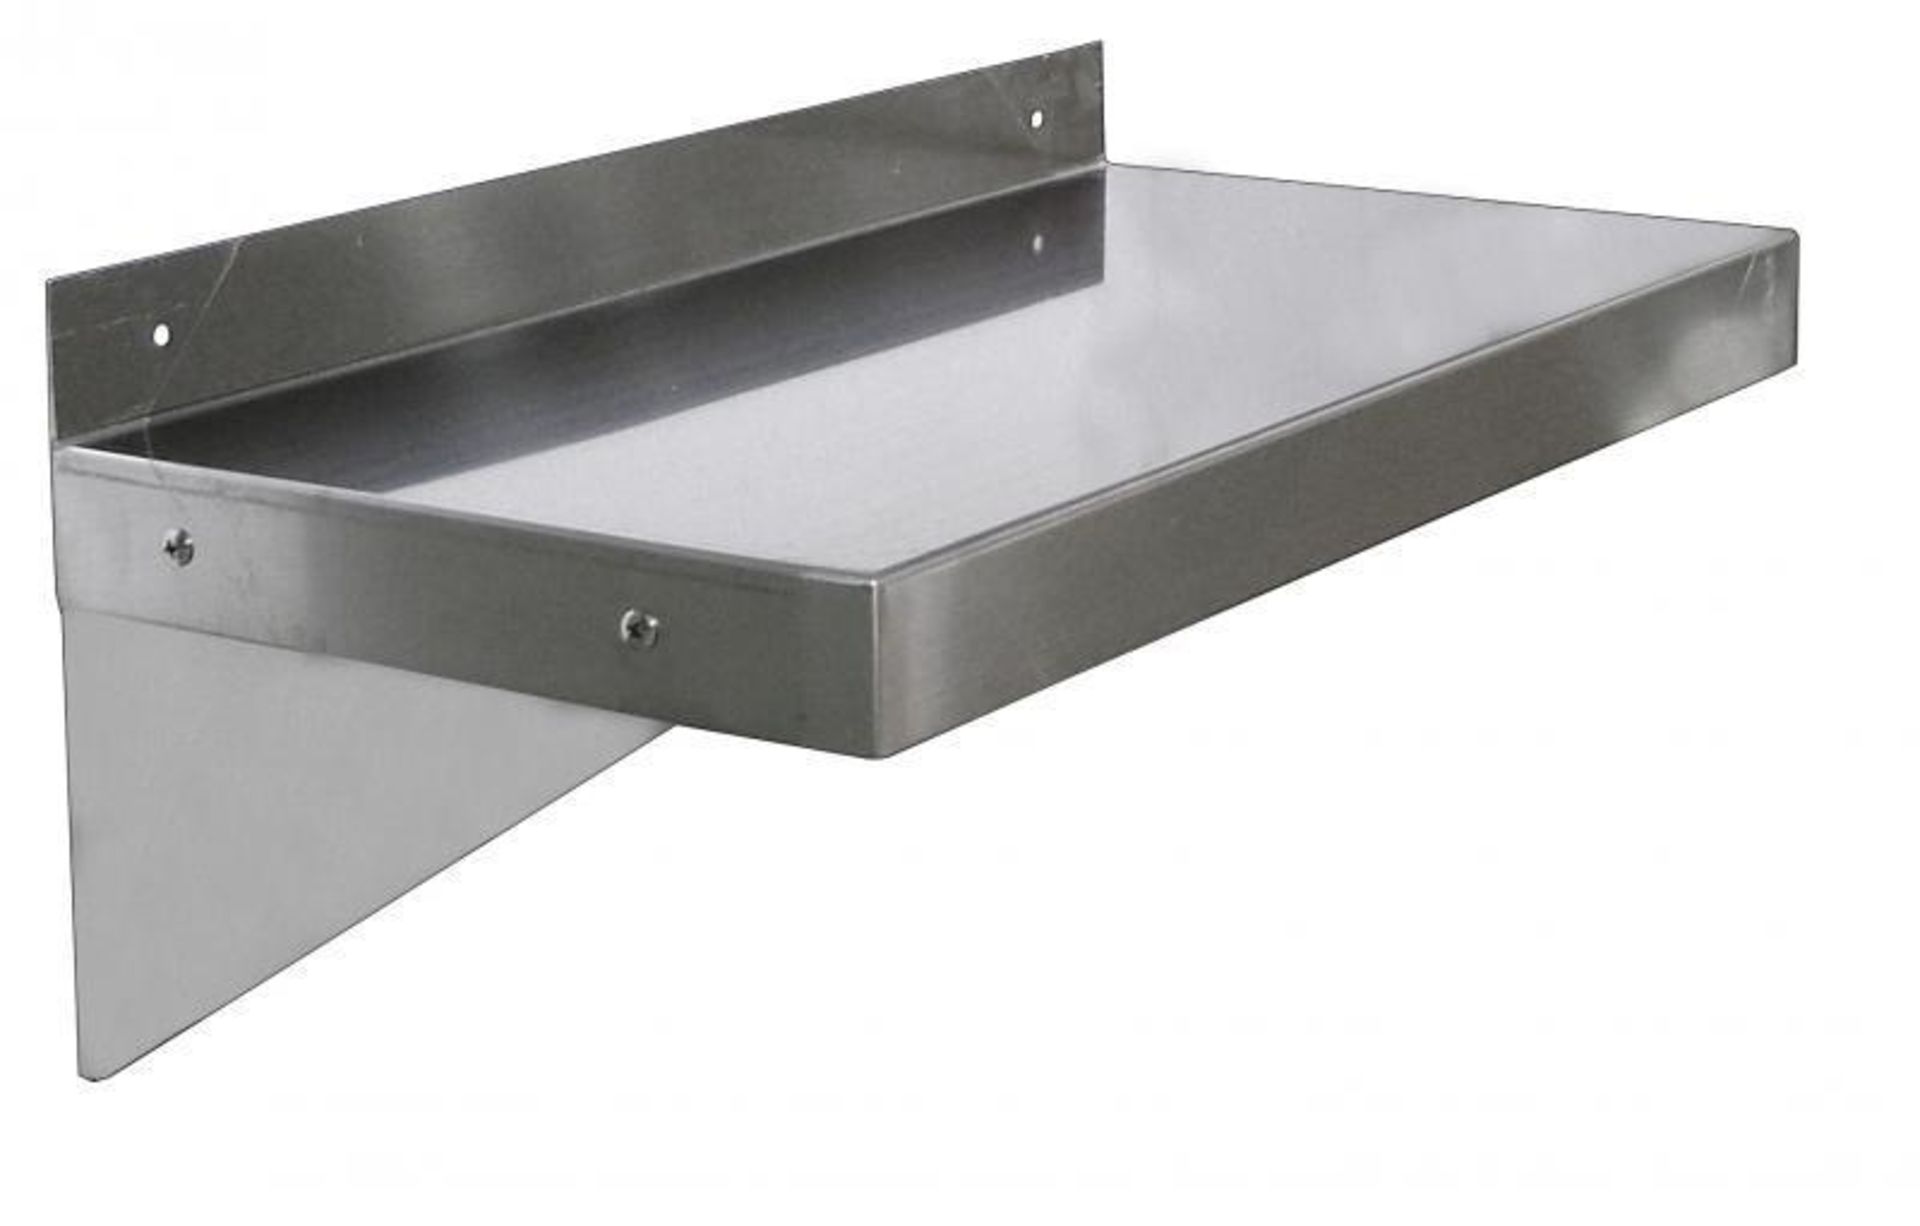 36" X 16" STAINLESS STEEL WALL SHELF - OMCAN 24409 - NEW - Image 12 of 13